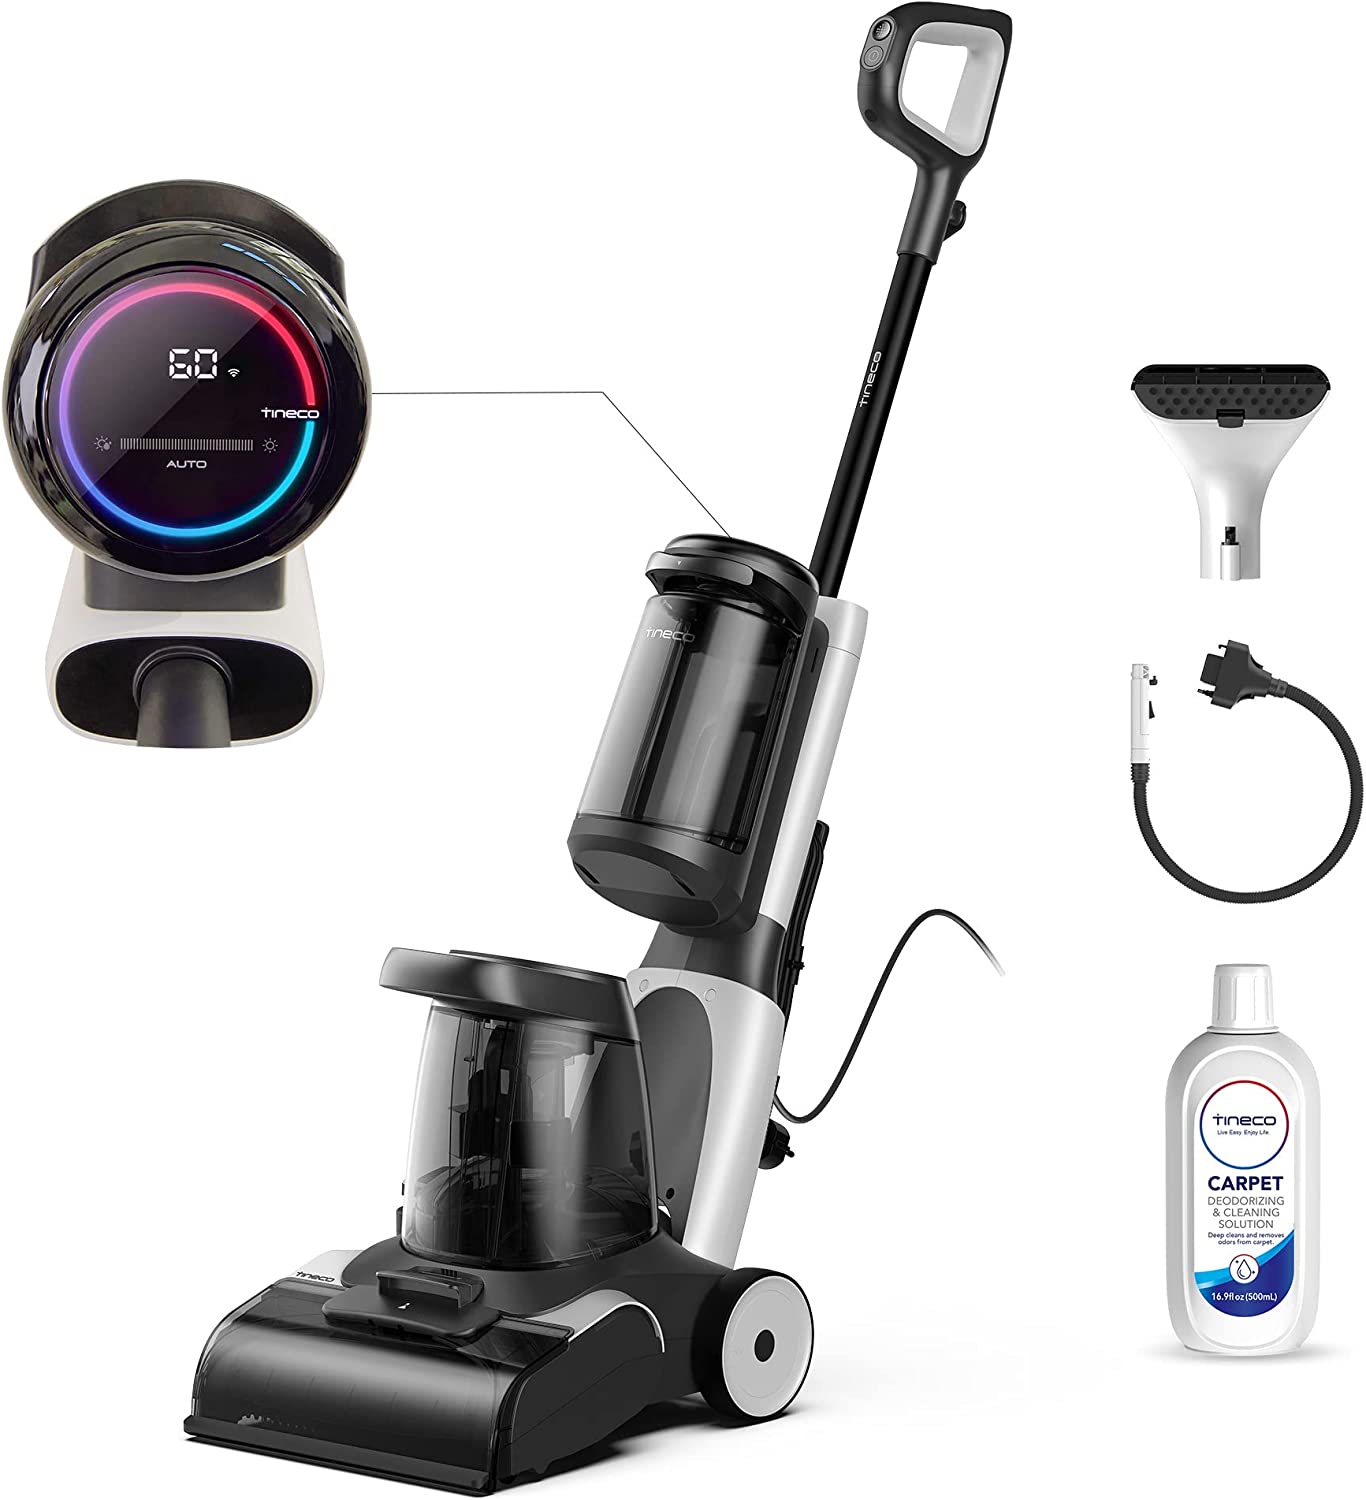 These Smart Tineco Vacuums Are on Sale for Prime Day